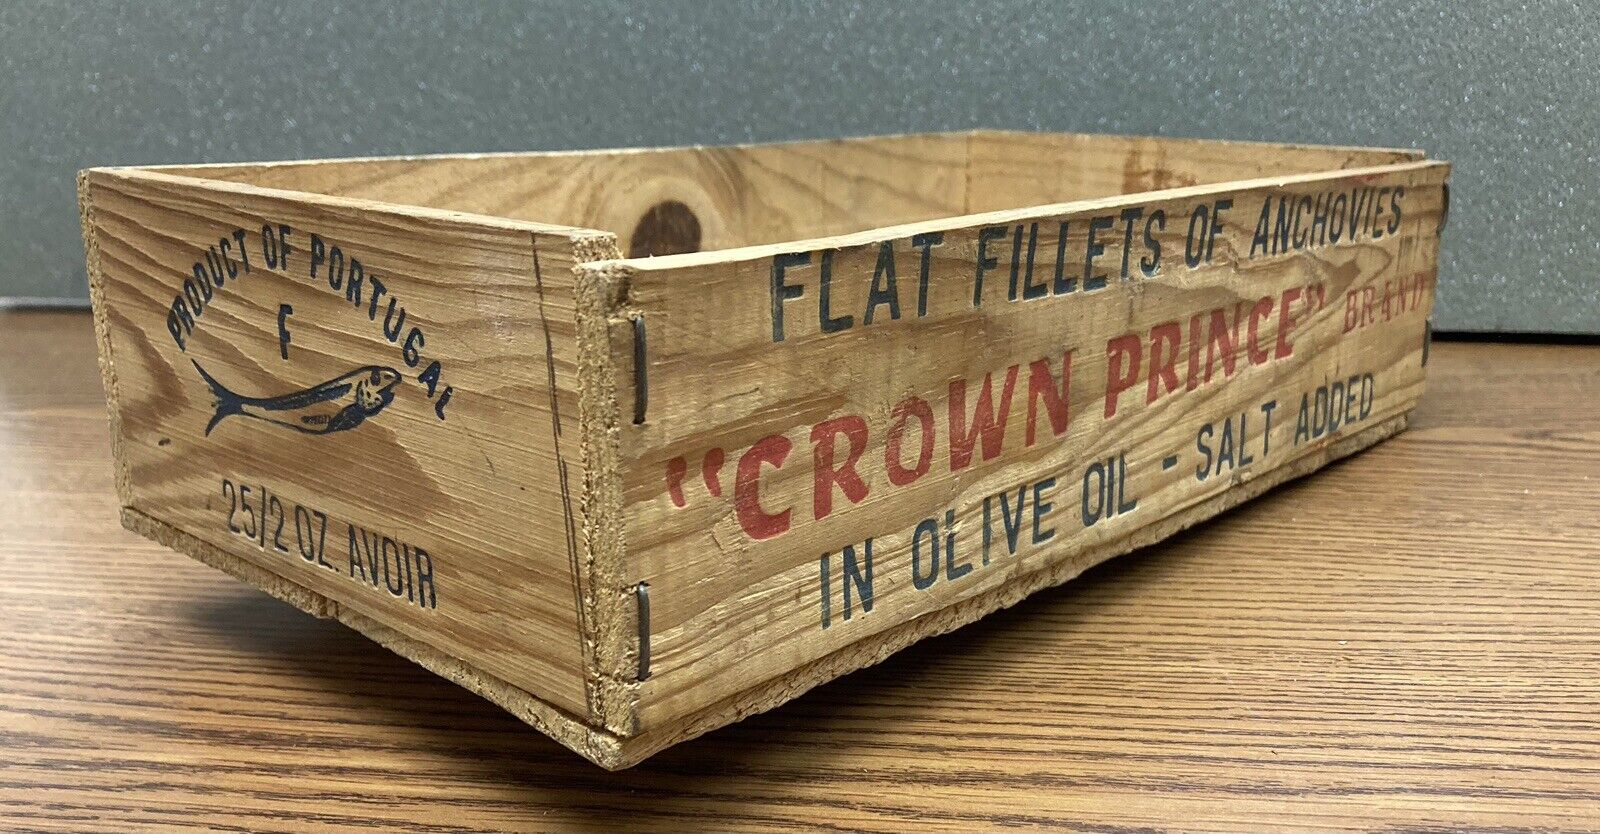 HARD TO FIND Vintage Crown Prince Brand Wood FLAT FILLETS OF ANCHOVIES Crate Box